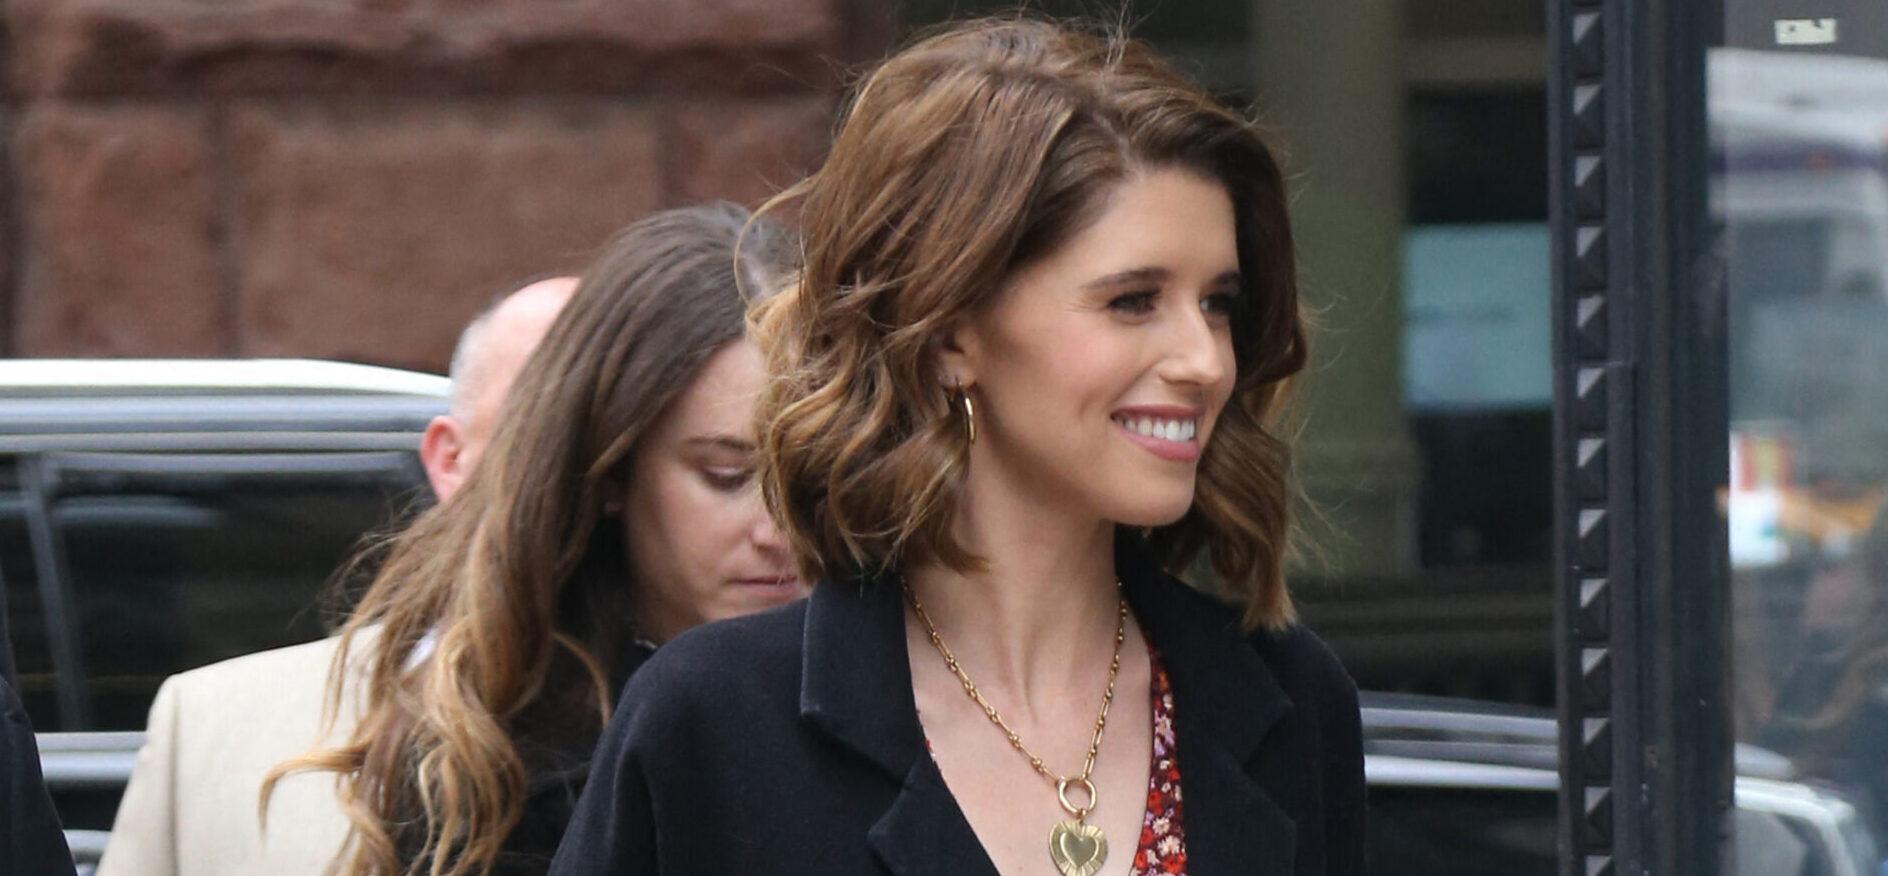 Katherine Schwarzenegger out and about in New York City